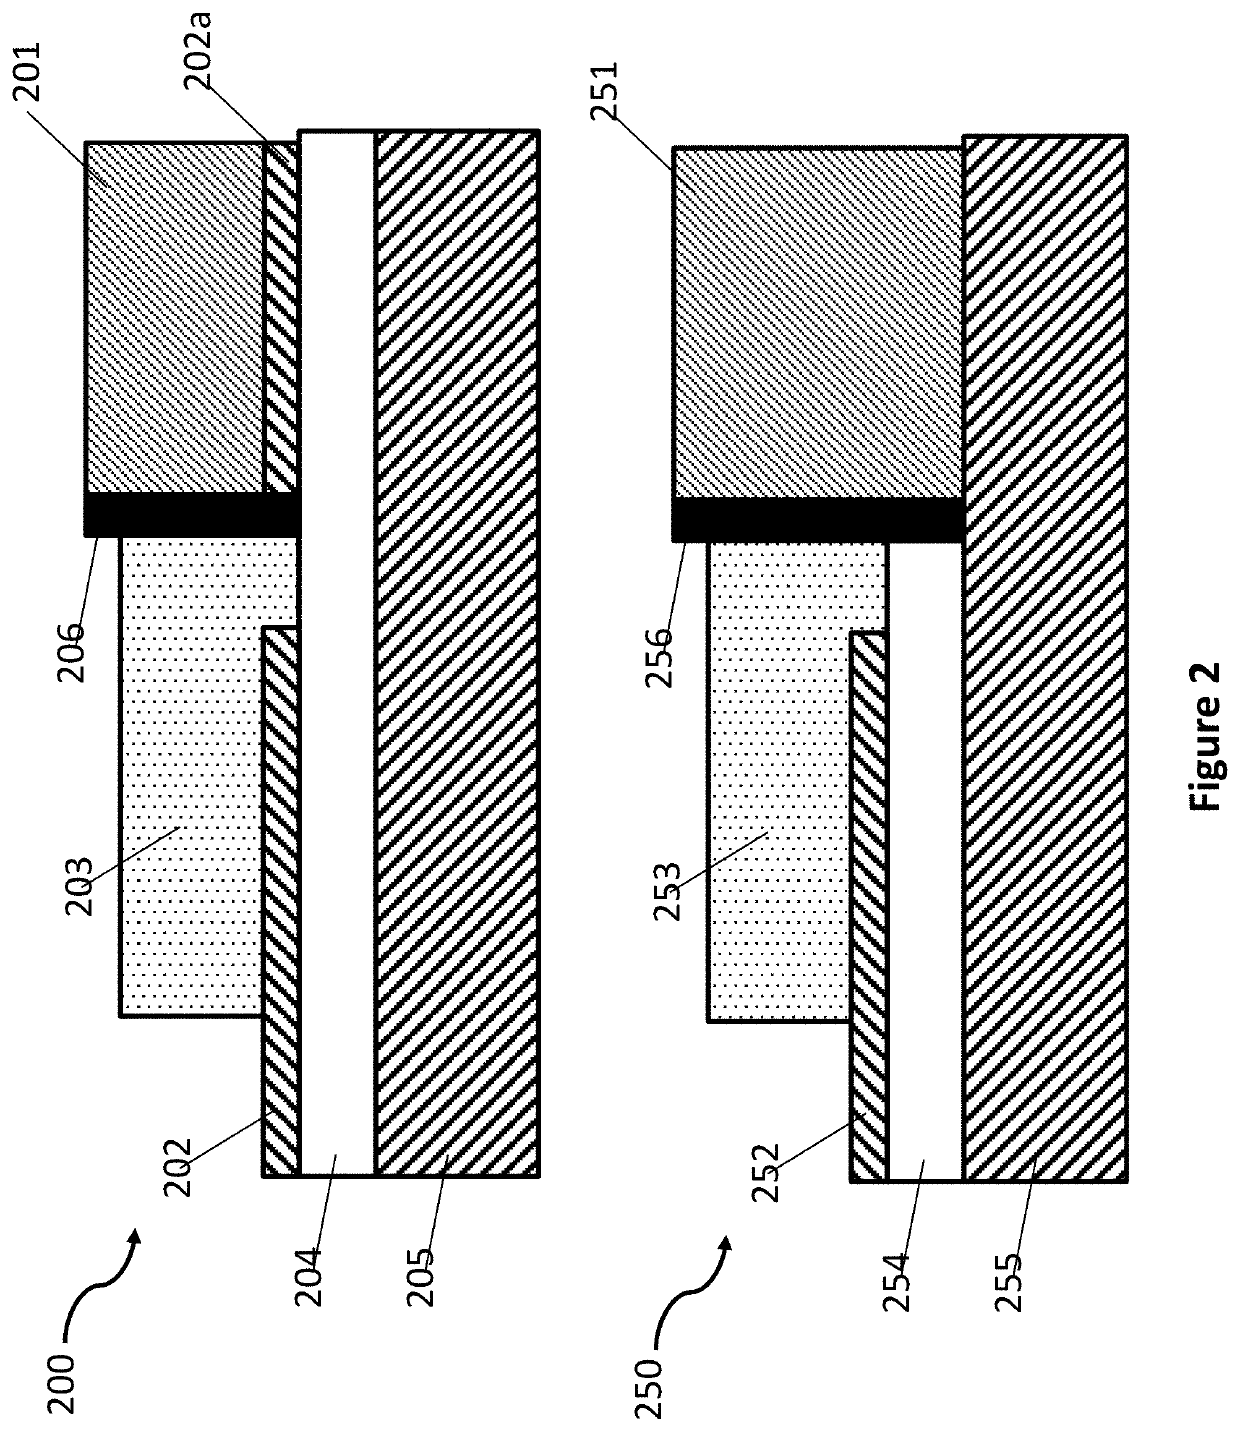 Integrated active devices with improved optical coupling to dielectric waveguides